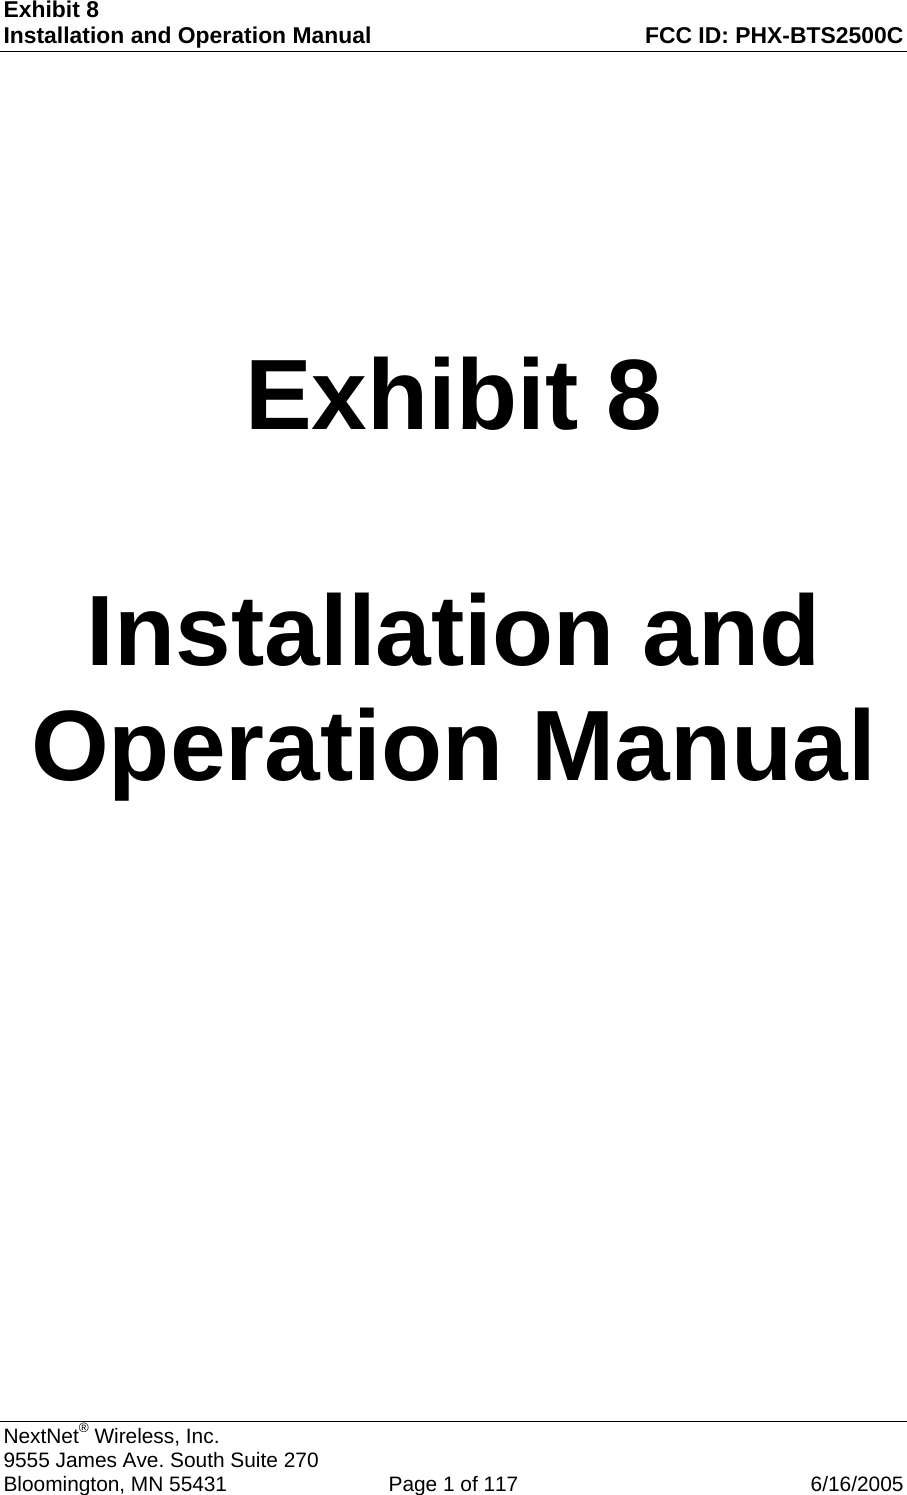 Exhibit 8 Installation and Operation Manual  FCC ID: PHX-BTS2500C      Exhibit 8  Installation and Operation Manual   NextNet  Wireless, Inc.  9555 James Ave. South Suite 270 Bloomington, MN 55431   Page 1 of 117  6/16/2005 ®